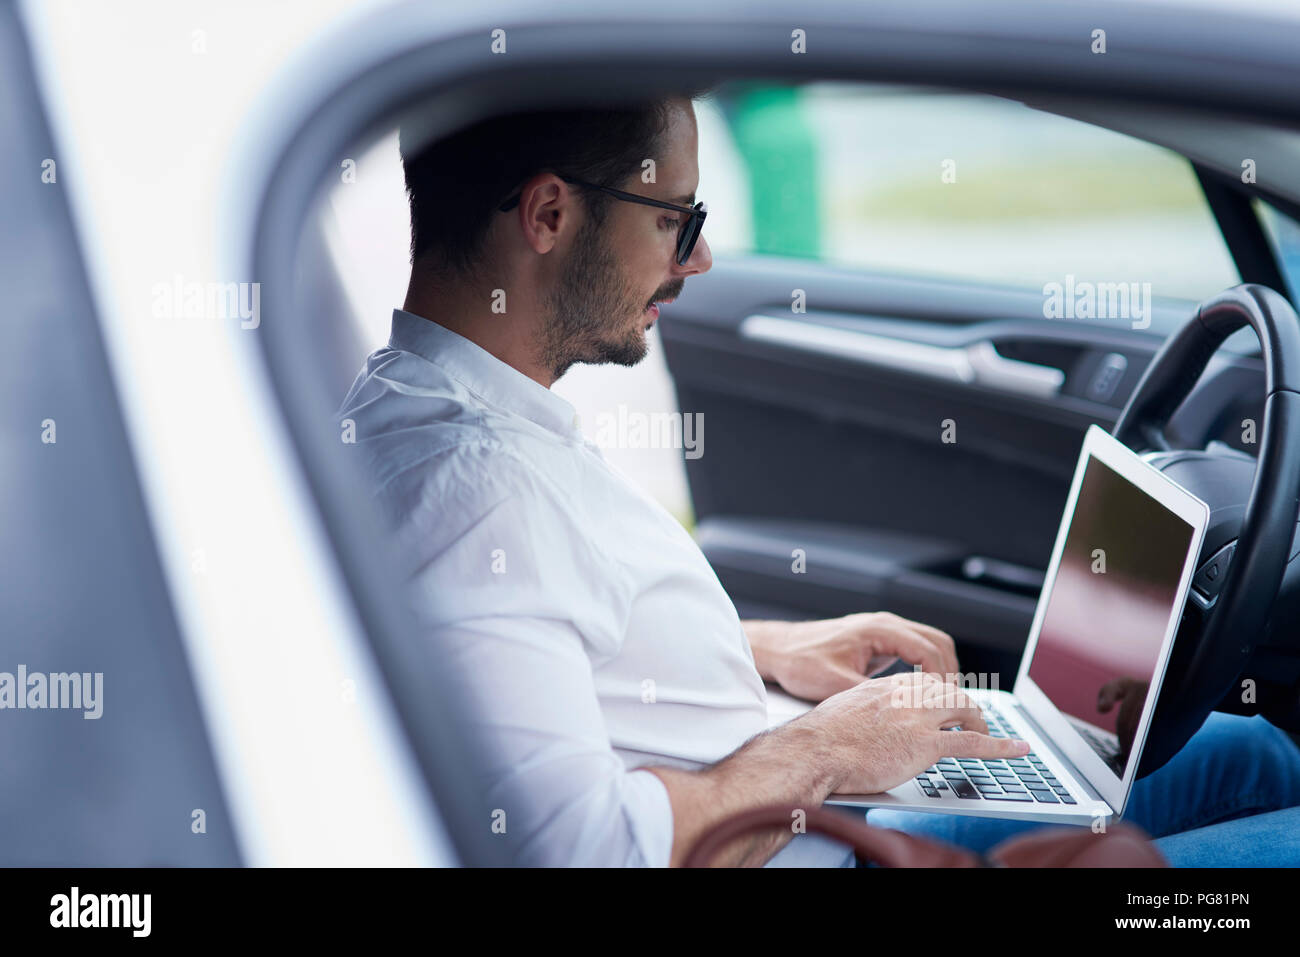 Businessman sitting in car working on laptop Stock Photo